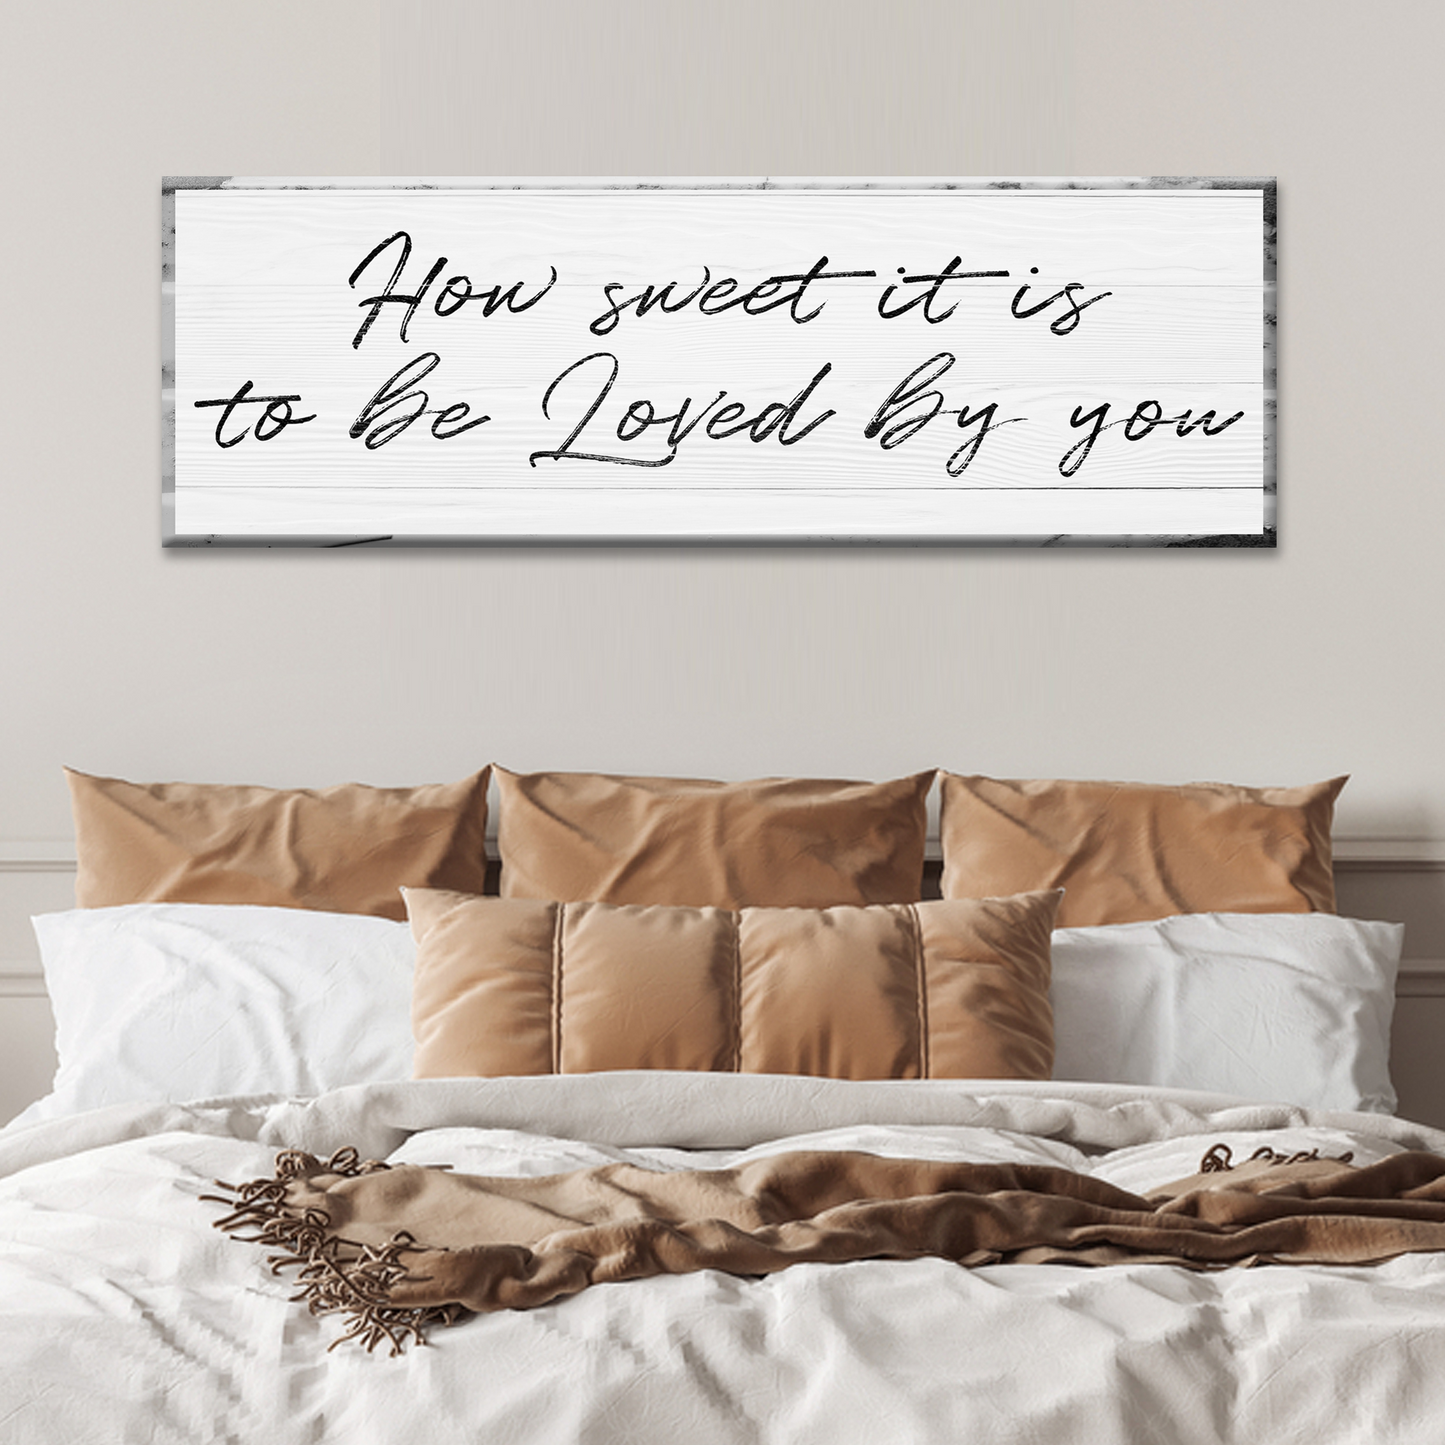 How sweet it is to be loved by you Sign - Image by Tailored Canvases